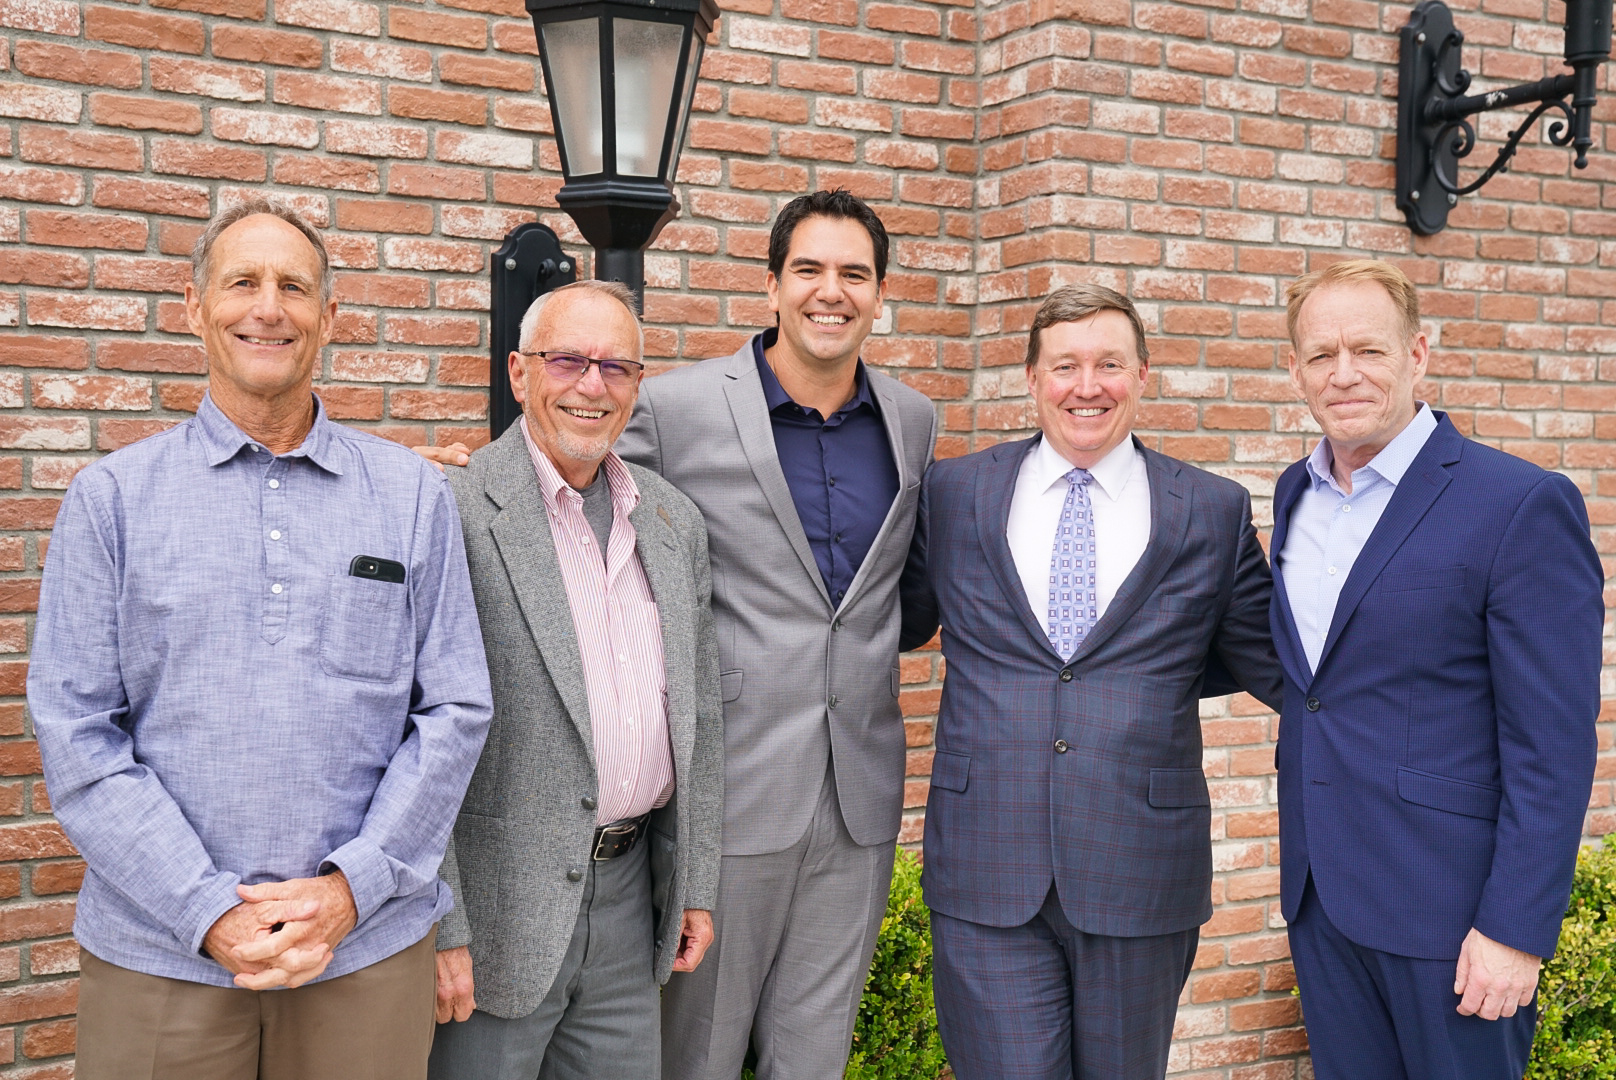 Broker owners from Realty Executives Carlsbad, Realty Experts, and Premiere Properties- Steve Jackson, Joe Cobb, George Piner, and President of First Team Michael Mahon with Vice President of First Team Rich Casto join together to expand services to San Diego county.